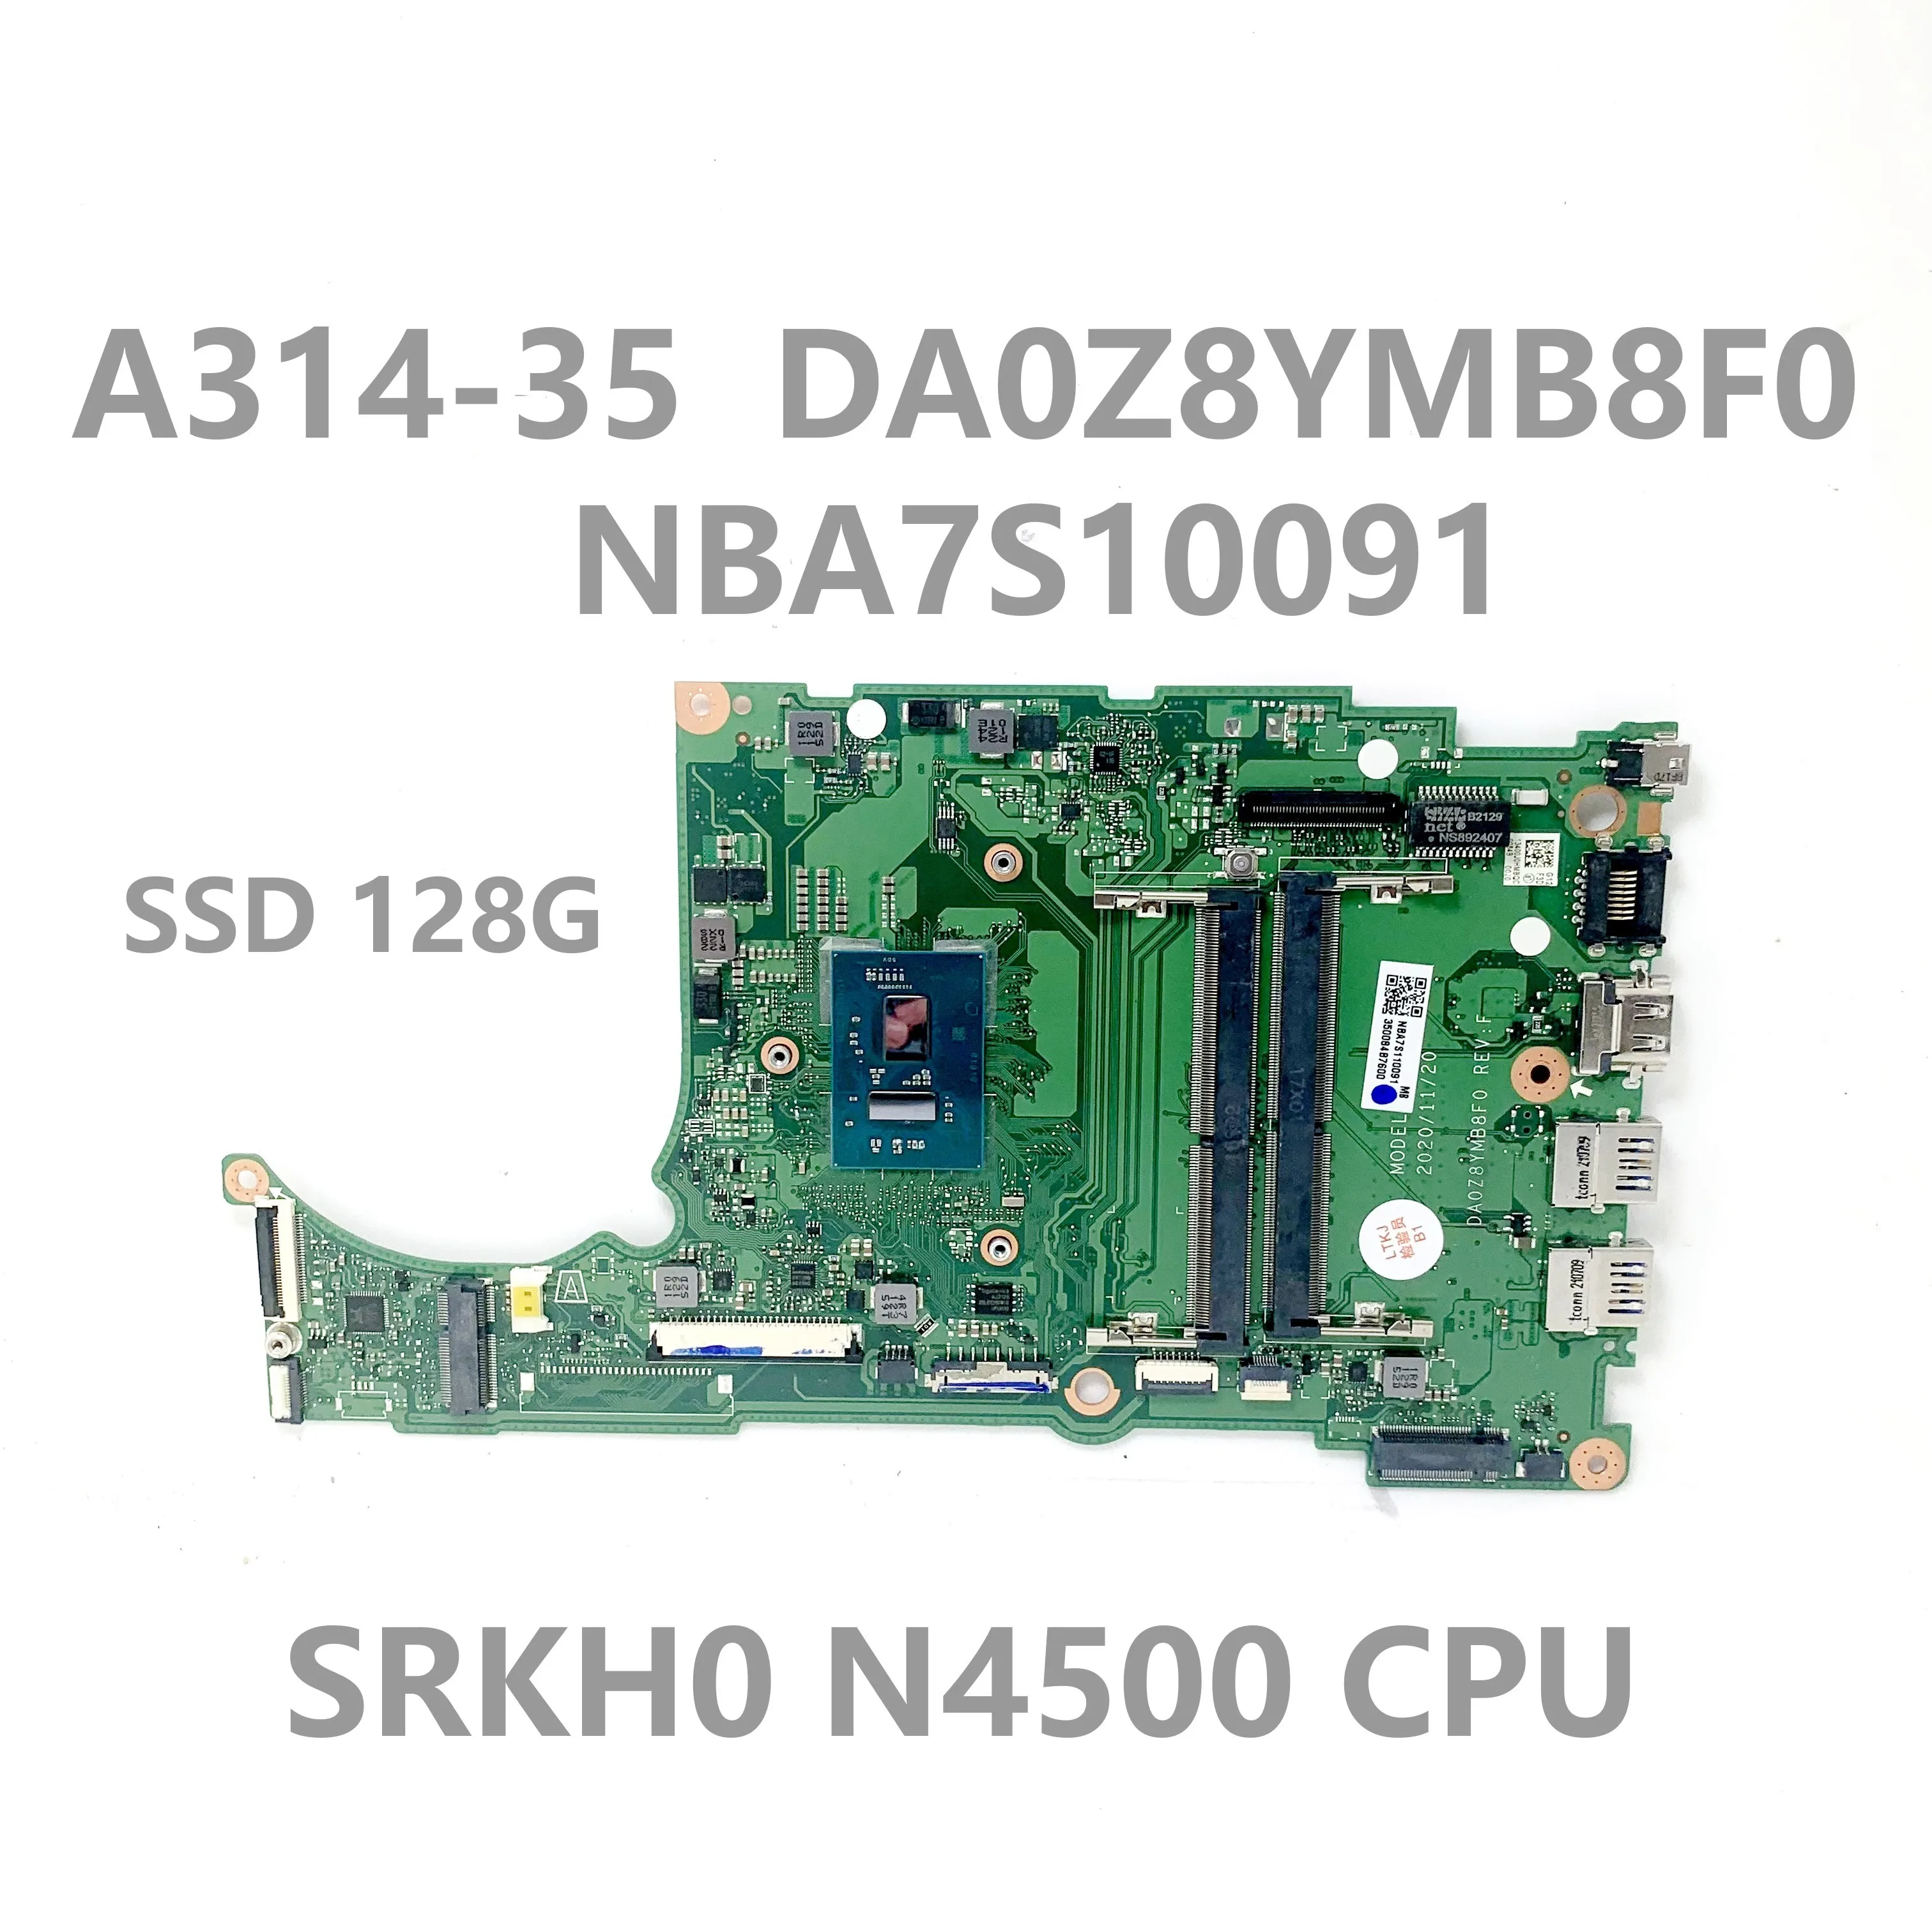 

DA0Z8YMB8F0 High Quality Mainboard For Acer A314-35 Laptop Motherboard NBA7S11009 With SRKH0 N4500 CPU 100% Full Working Well